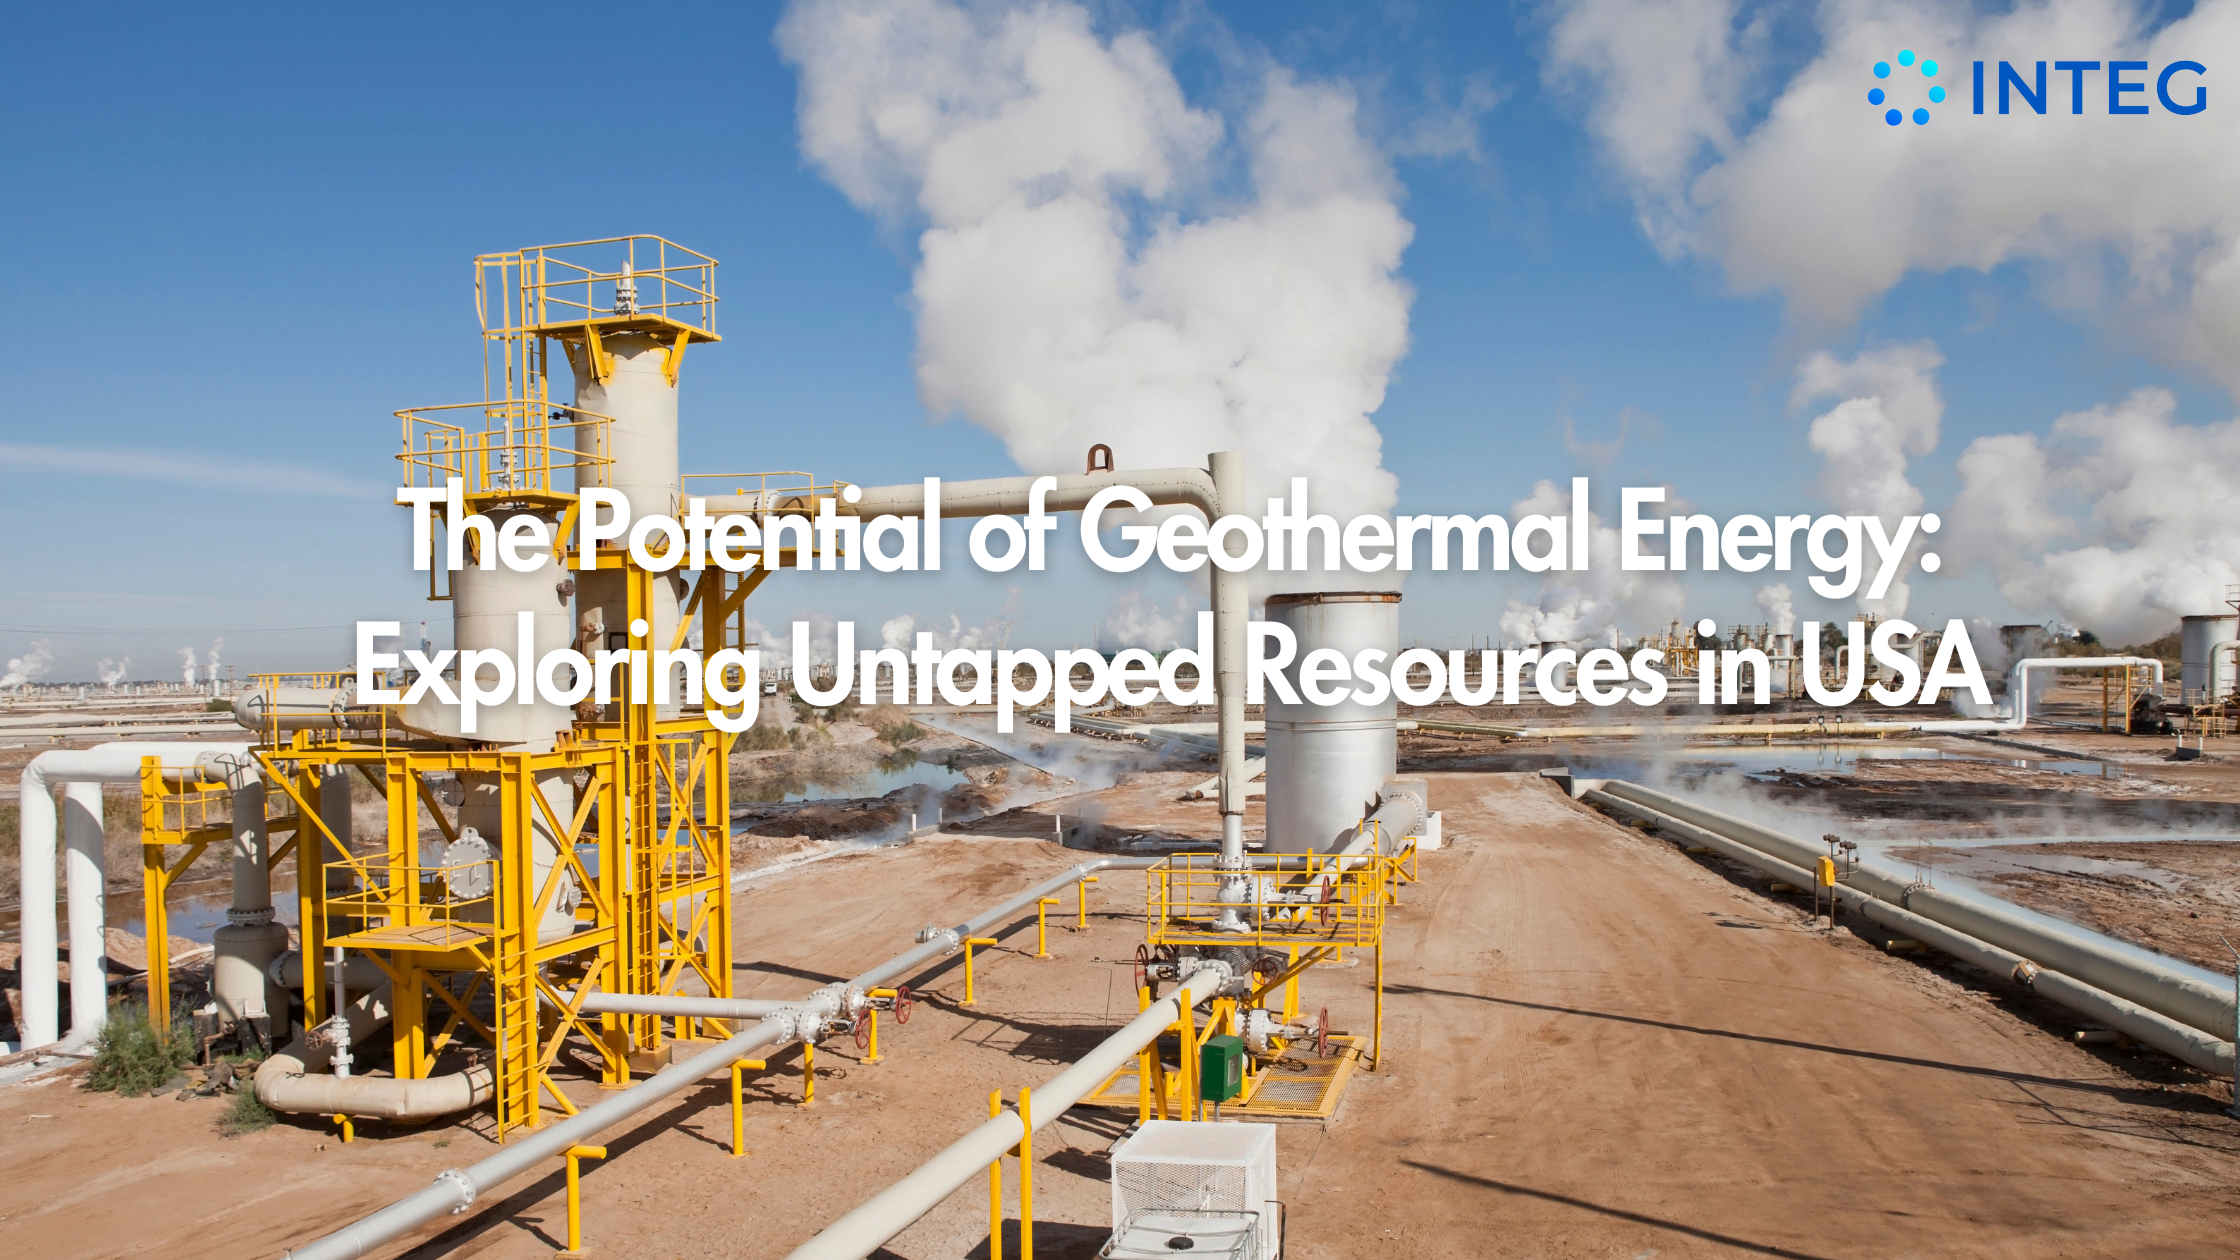 The Potential of Geothermal Energy: Exploring Untapped Resources in the USA | Integ Consulting | Agile Analytics | Powergads